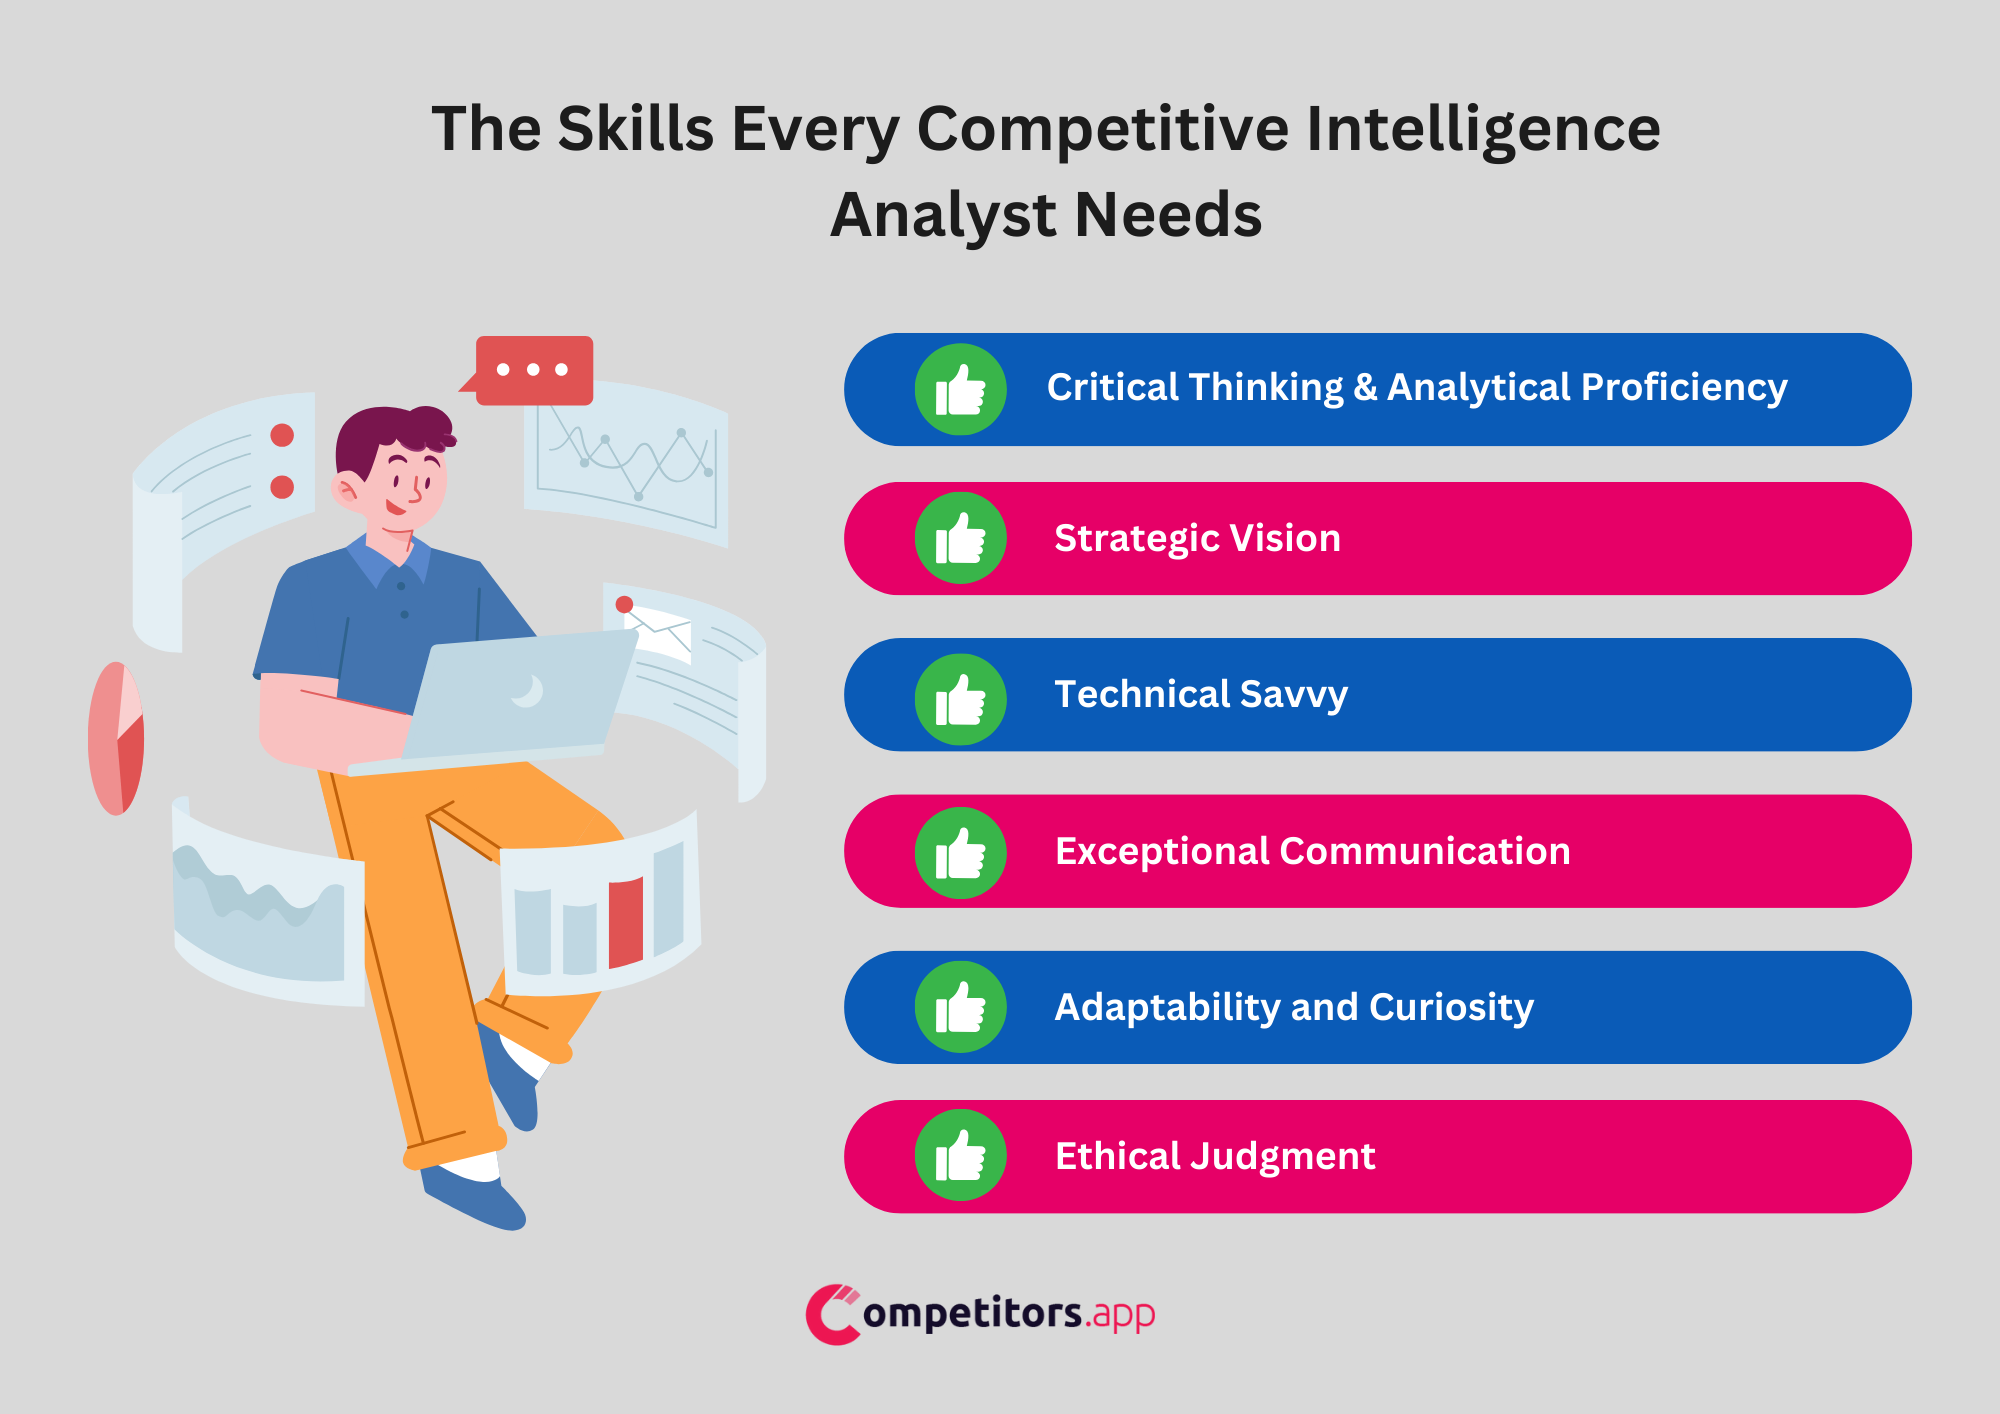 The Skills Every Competitive Intelligence Analyst Needs